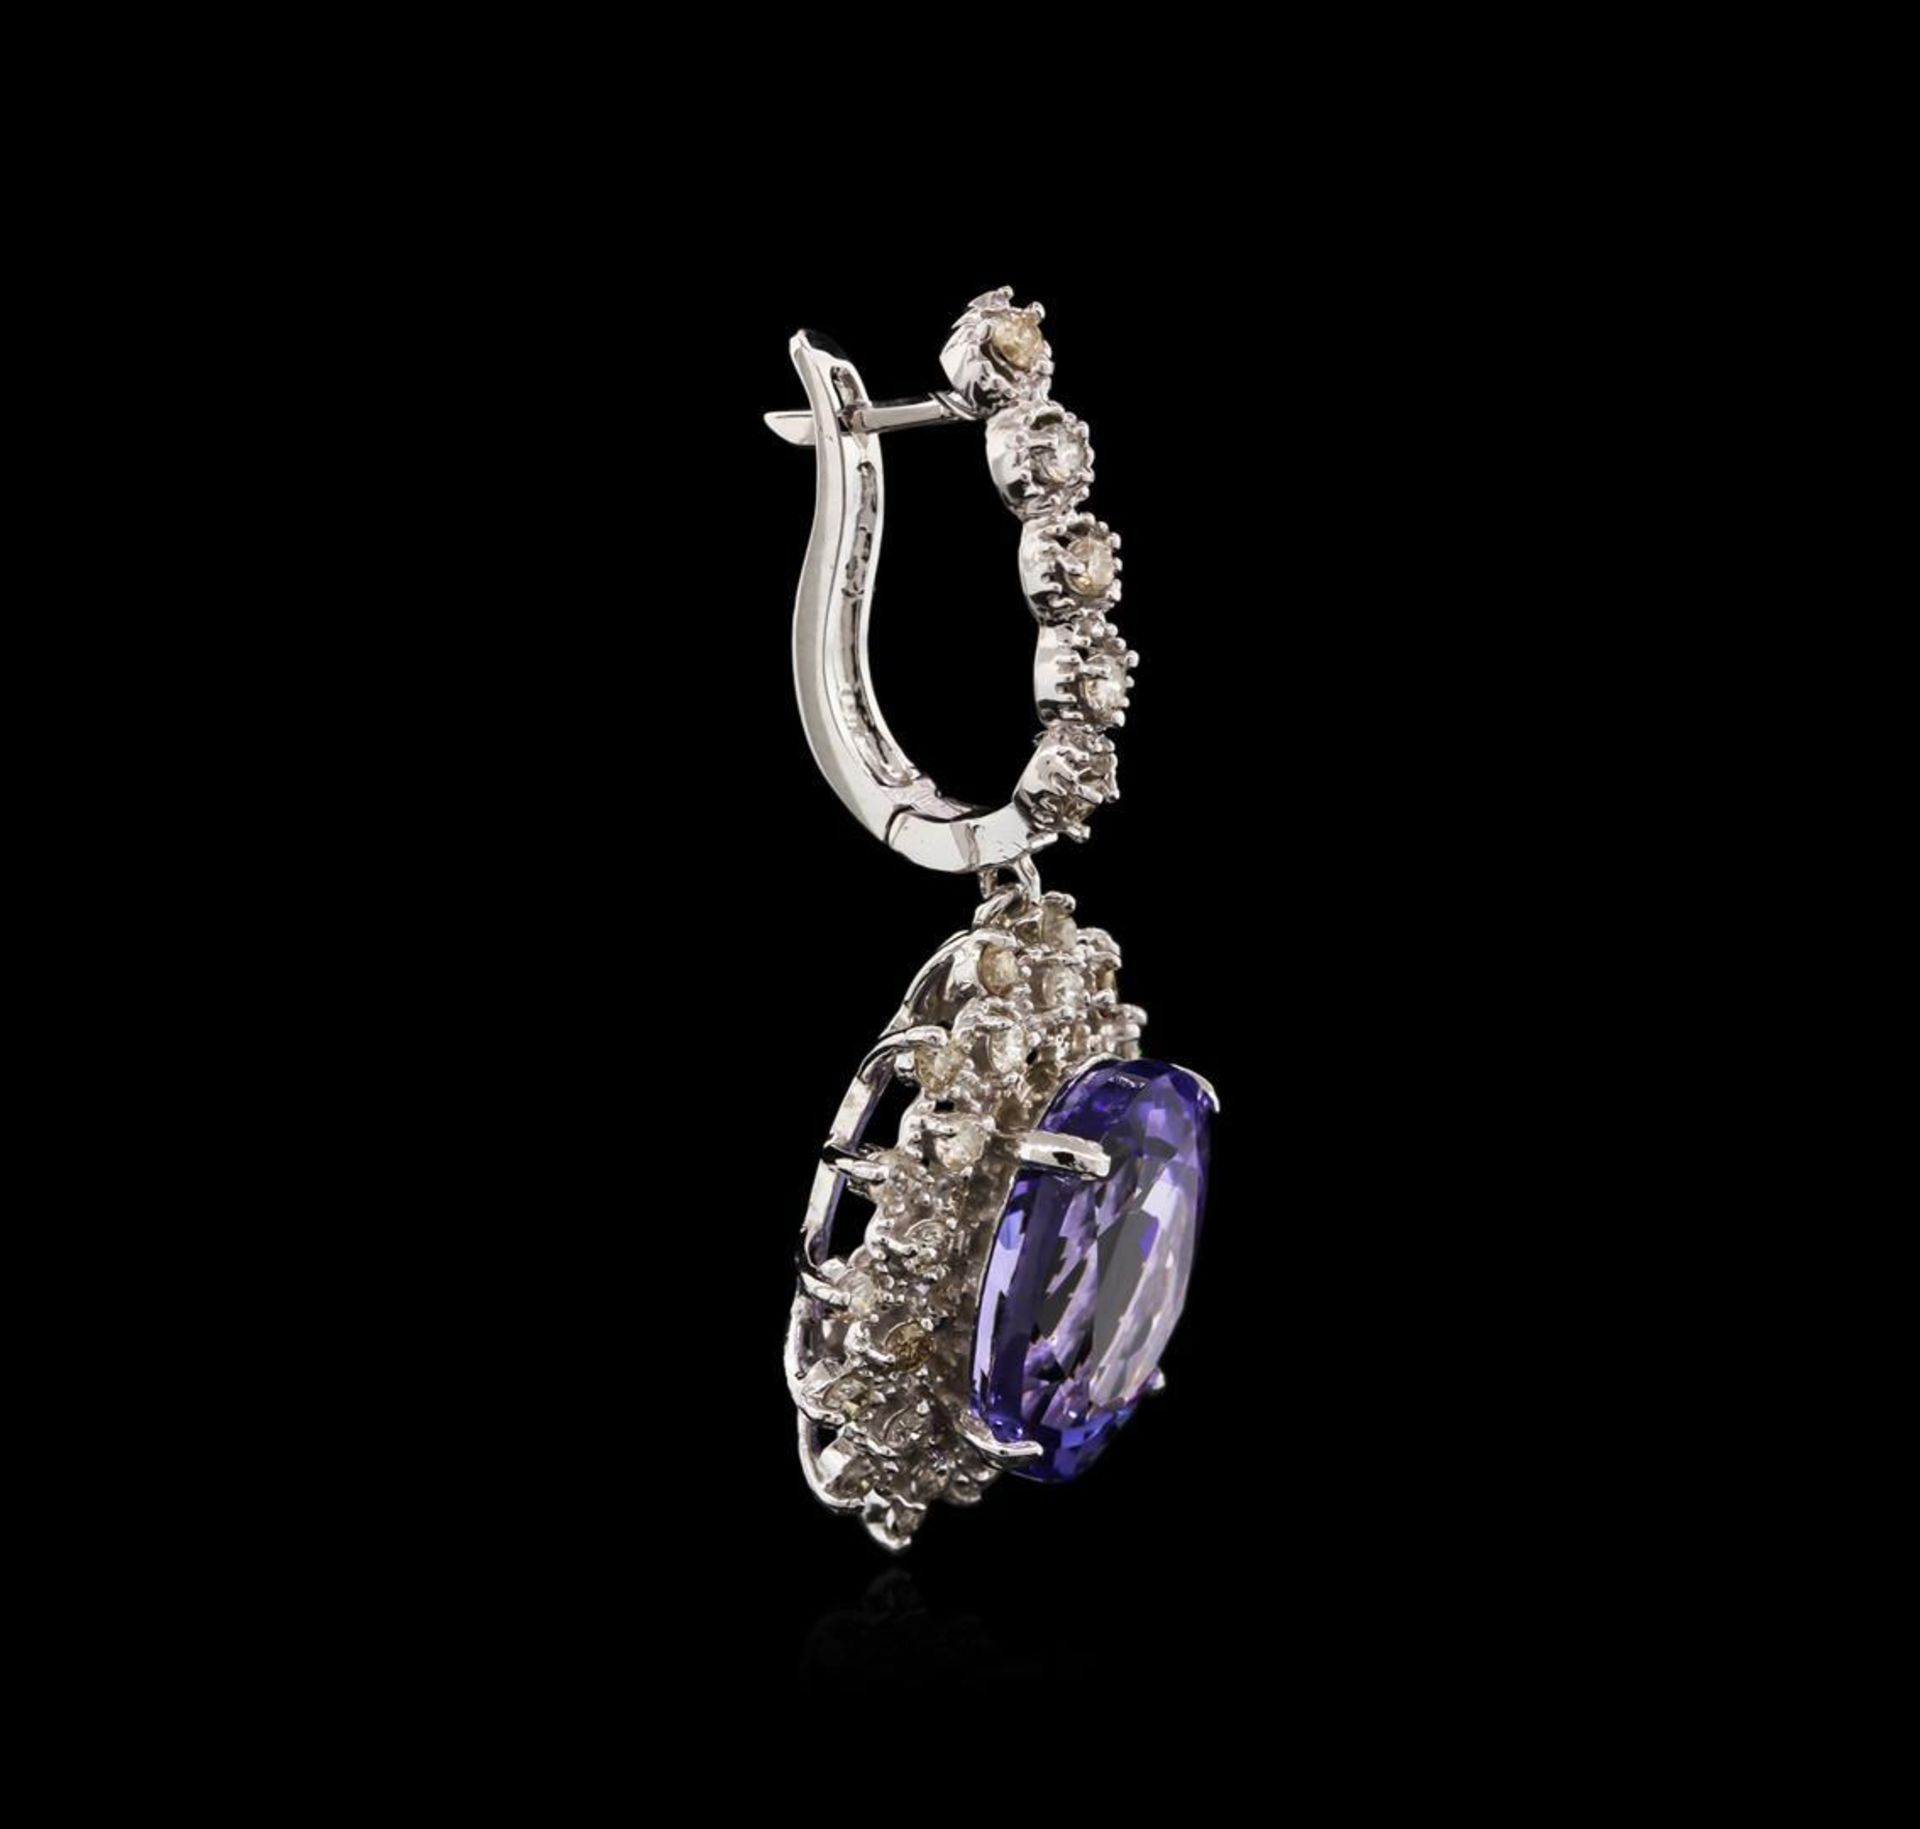 14.78 ctw Tanzanite and Diamond Earrings - 14KT White Gold - Image 2 of 3